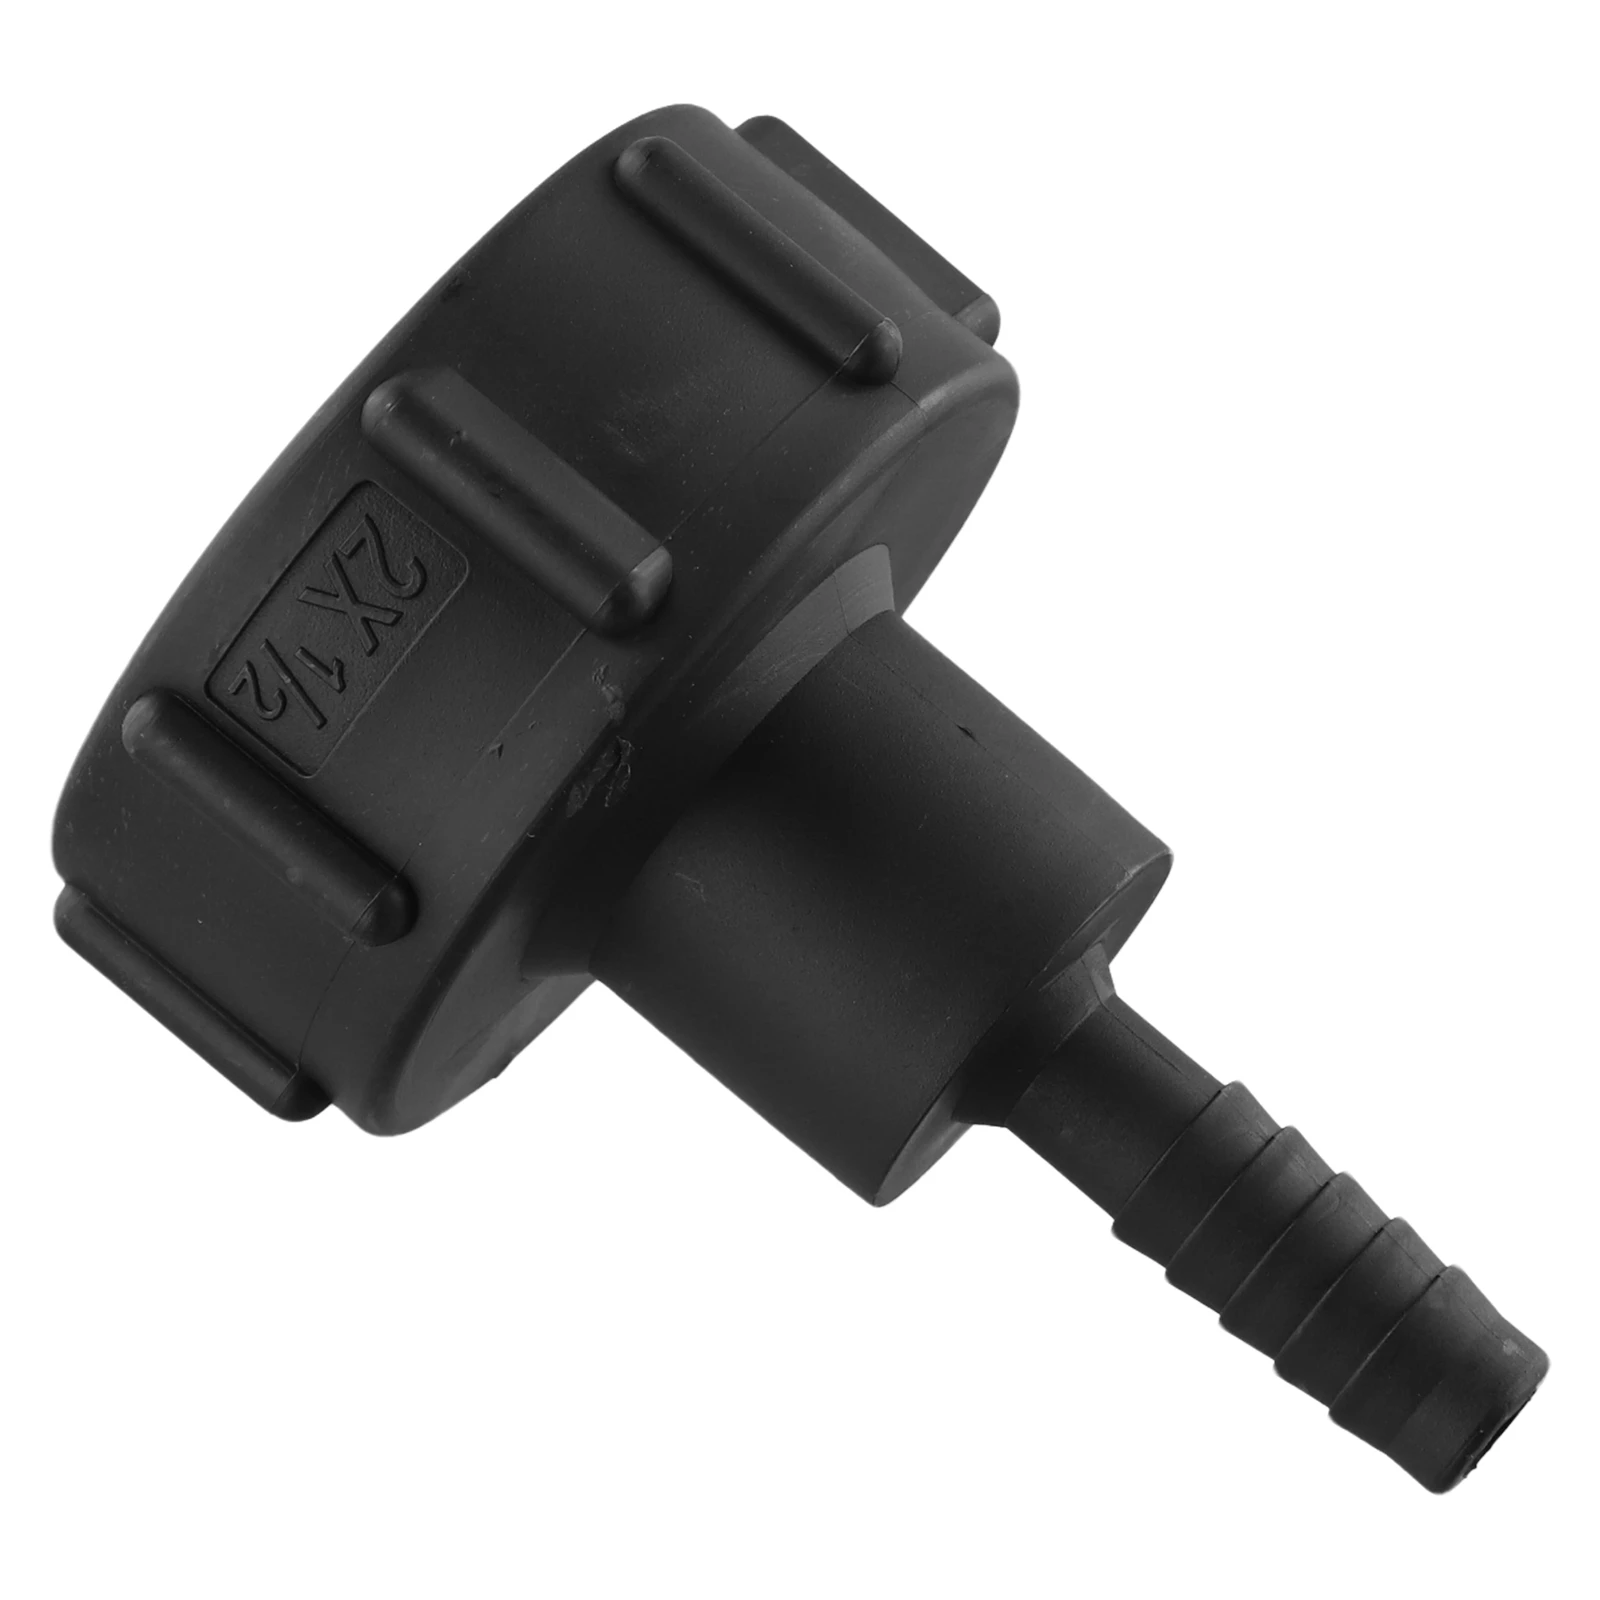 

IBC Tank Bucket Connector PP Plastic Replacement Tap Thread 1/2in 3/4in 1in 2in 1Pcs Accessories Adapter Black